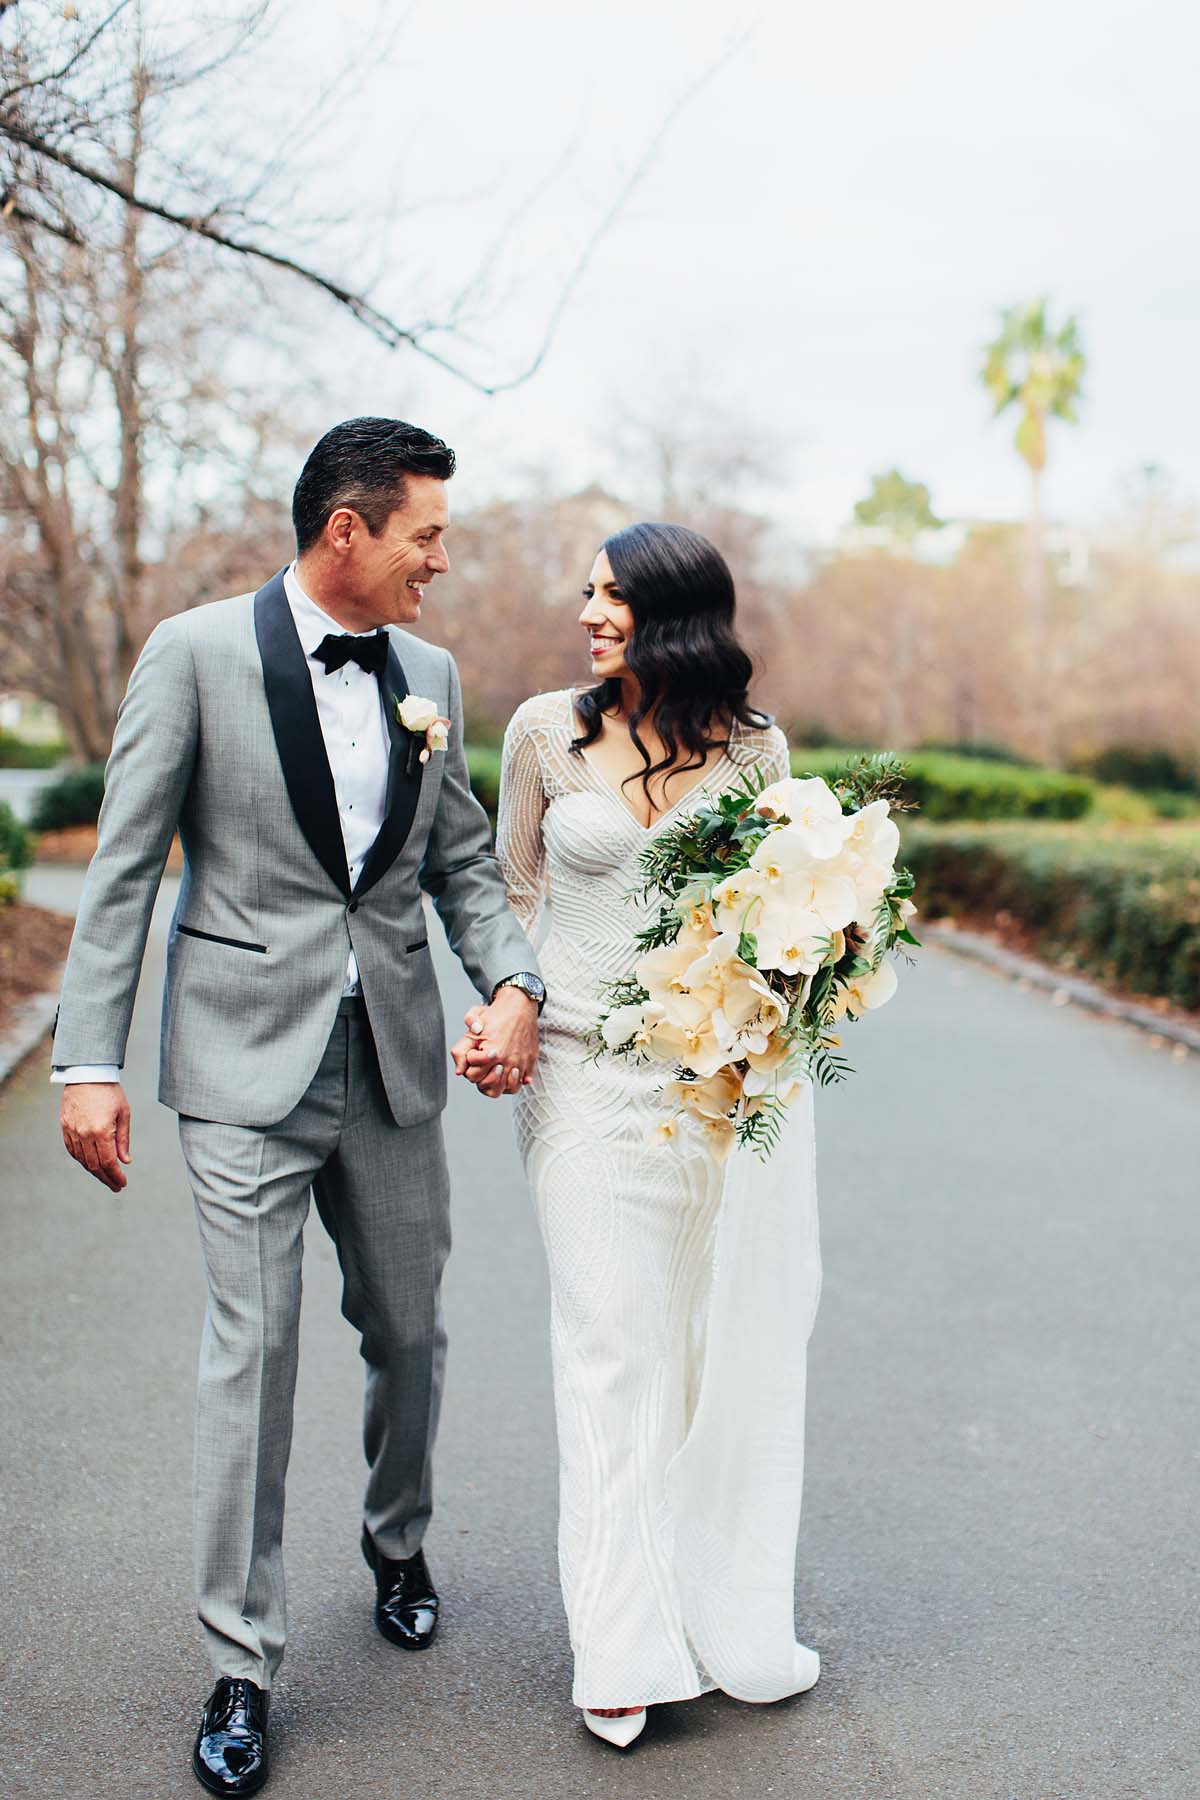 Bride and groom walking while holding wedding flowers